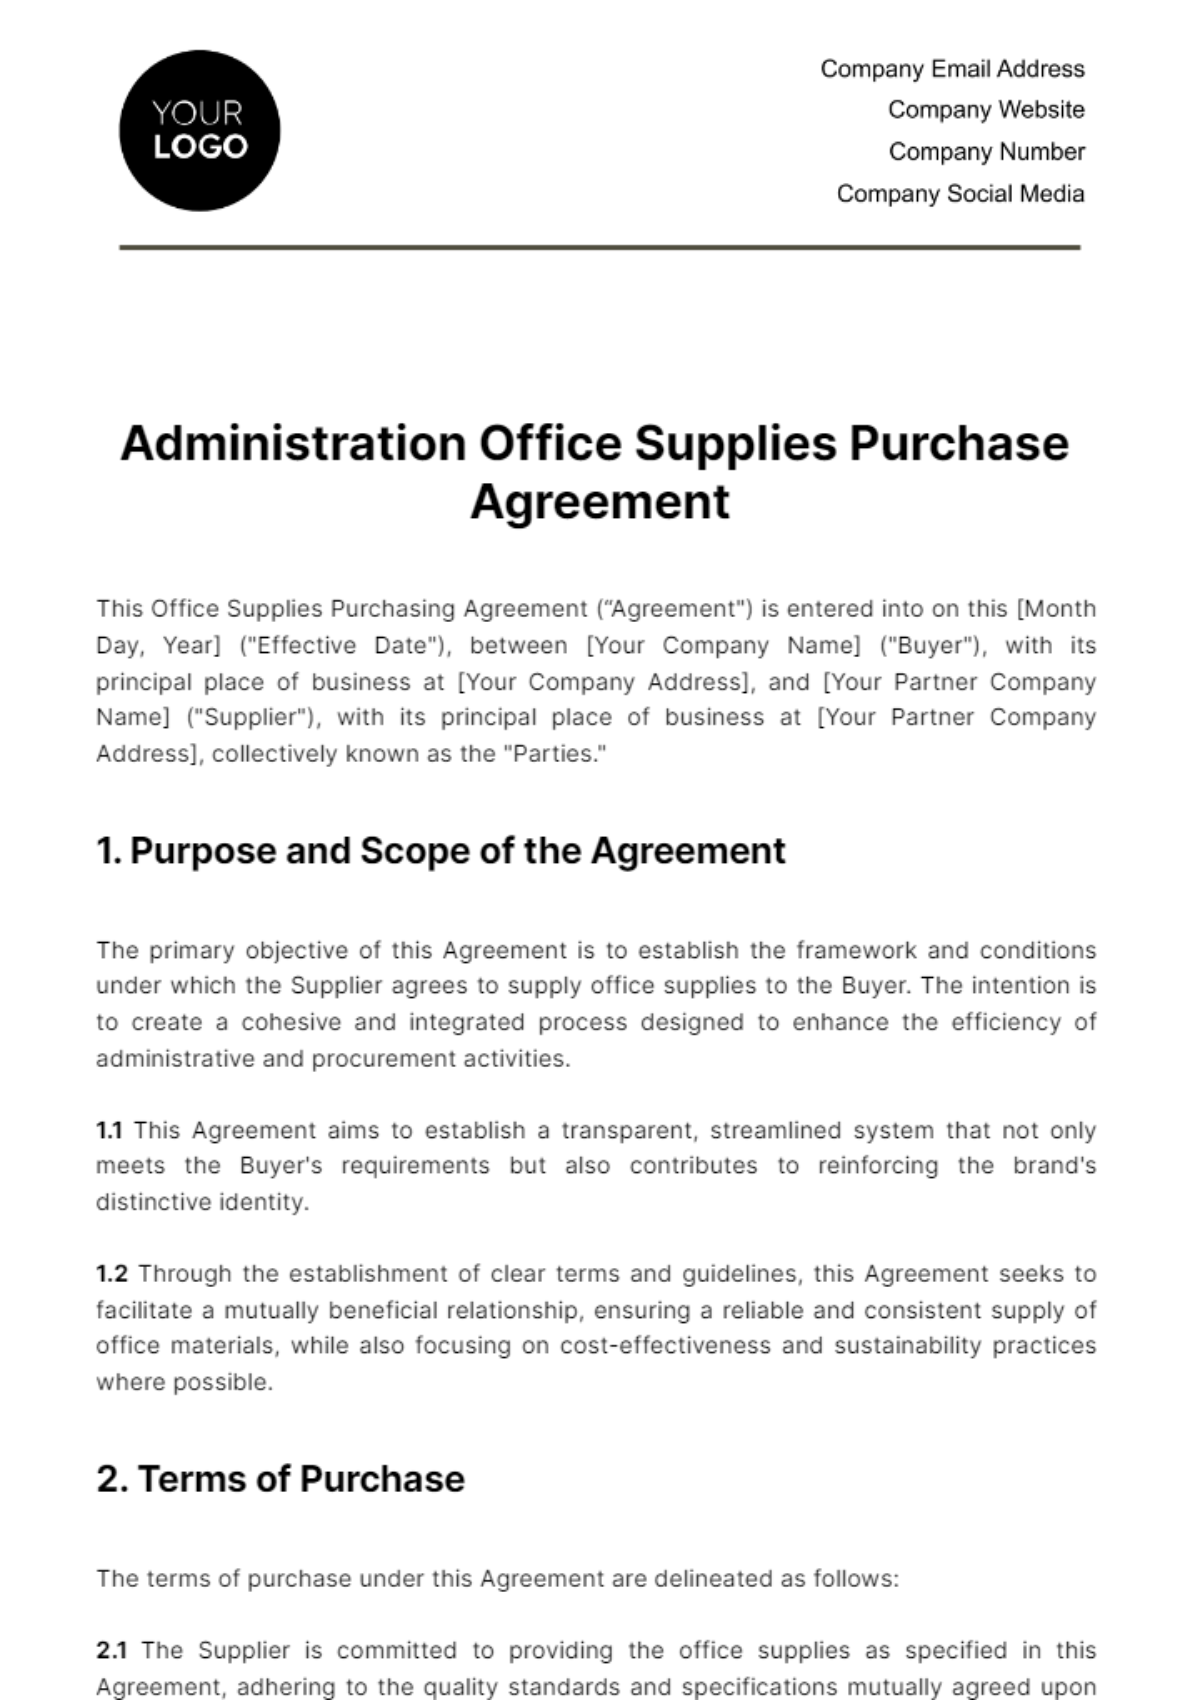 Free Administration Office Supplies Purchase Agreement Template